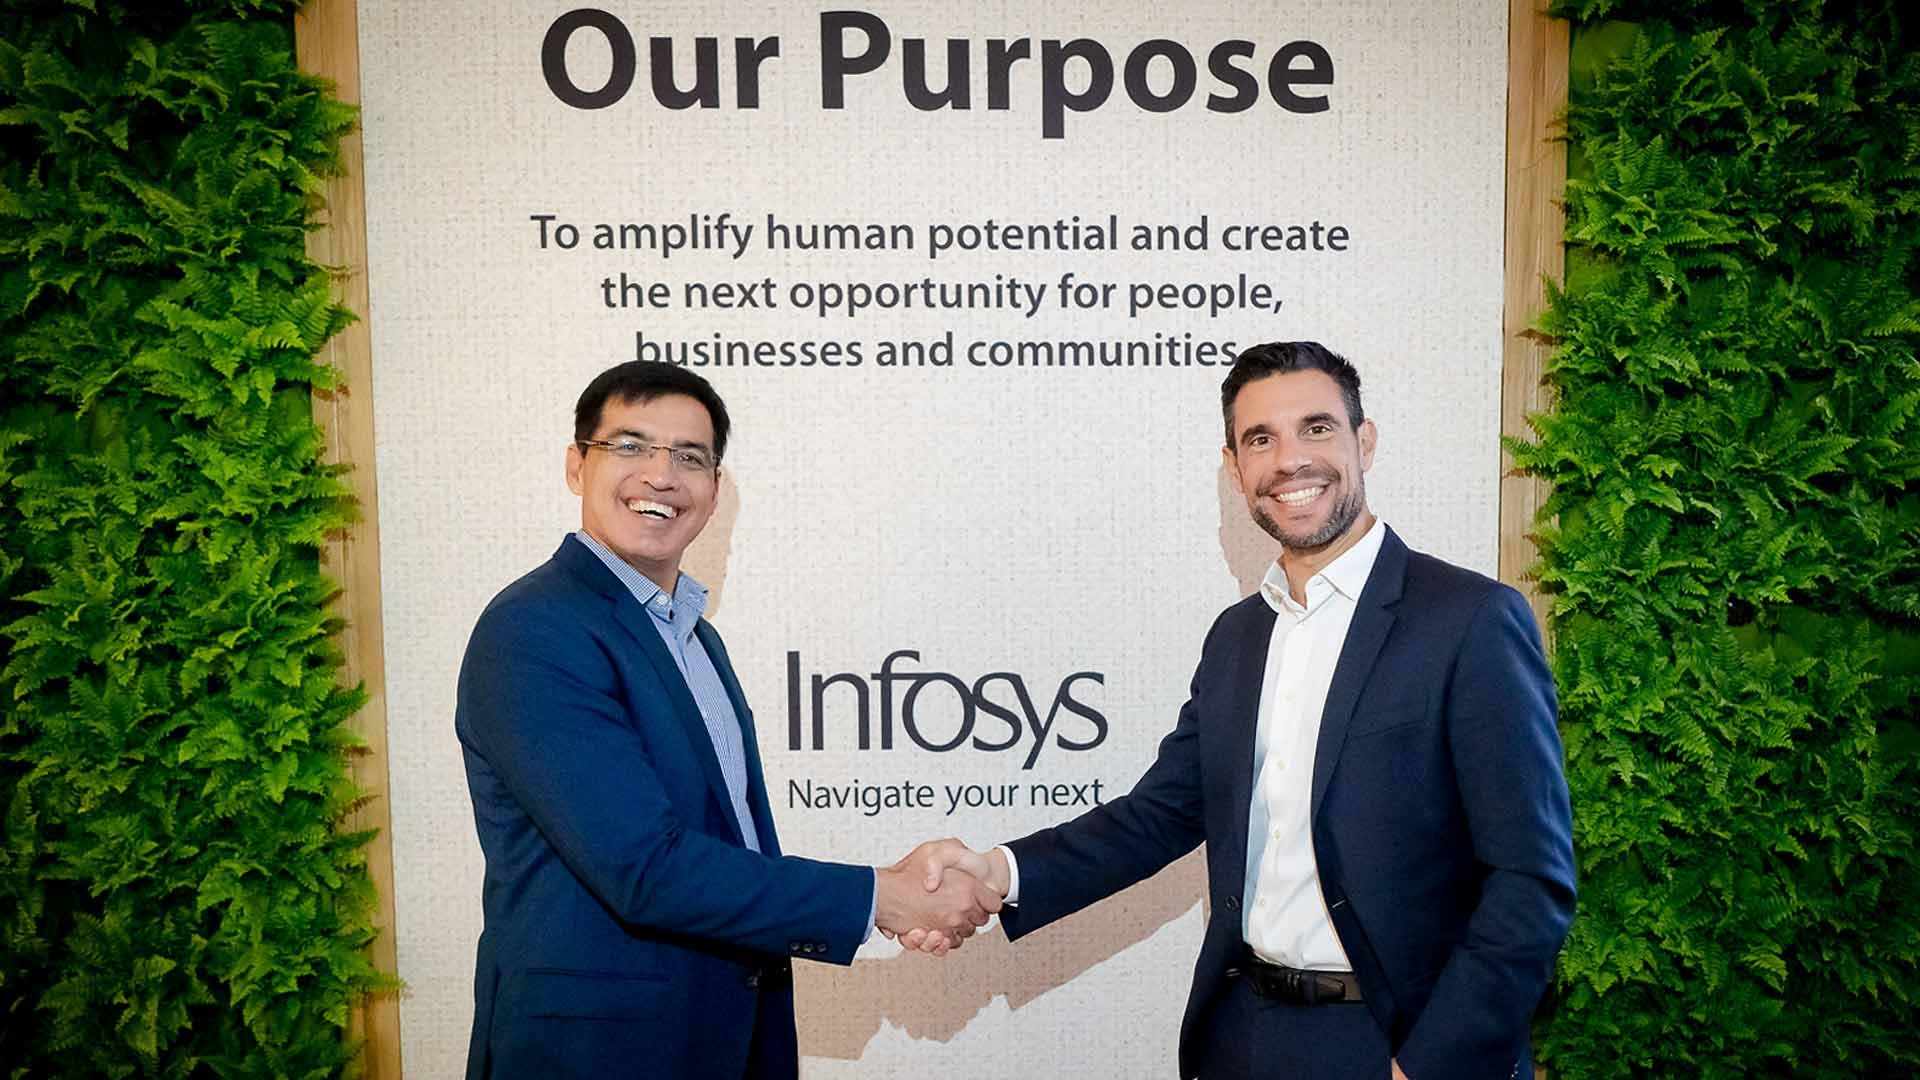 Sumit Virmani, Executive Vice President & Global Chief Marketing Officer, Infosys, along with Daniele Sano, Chief Business Officer, ATP.